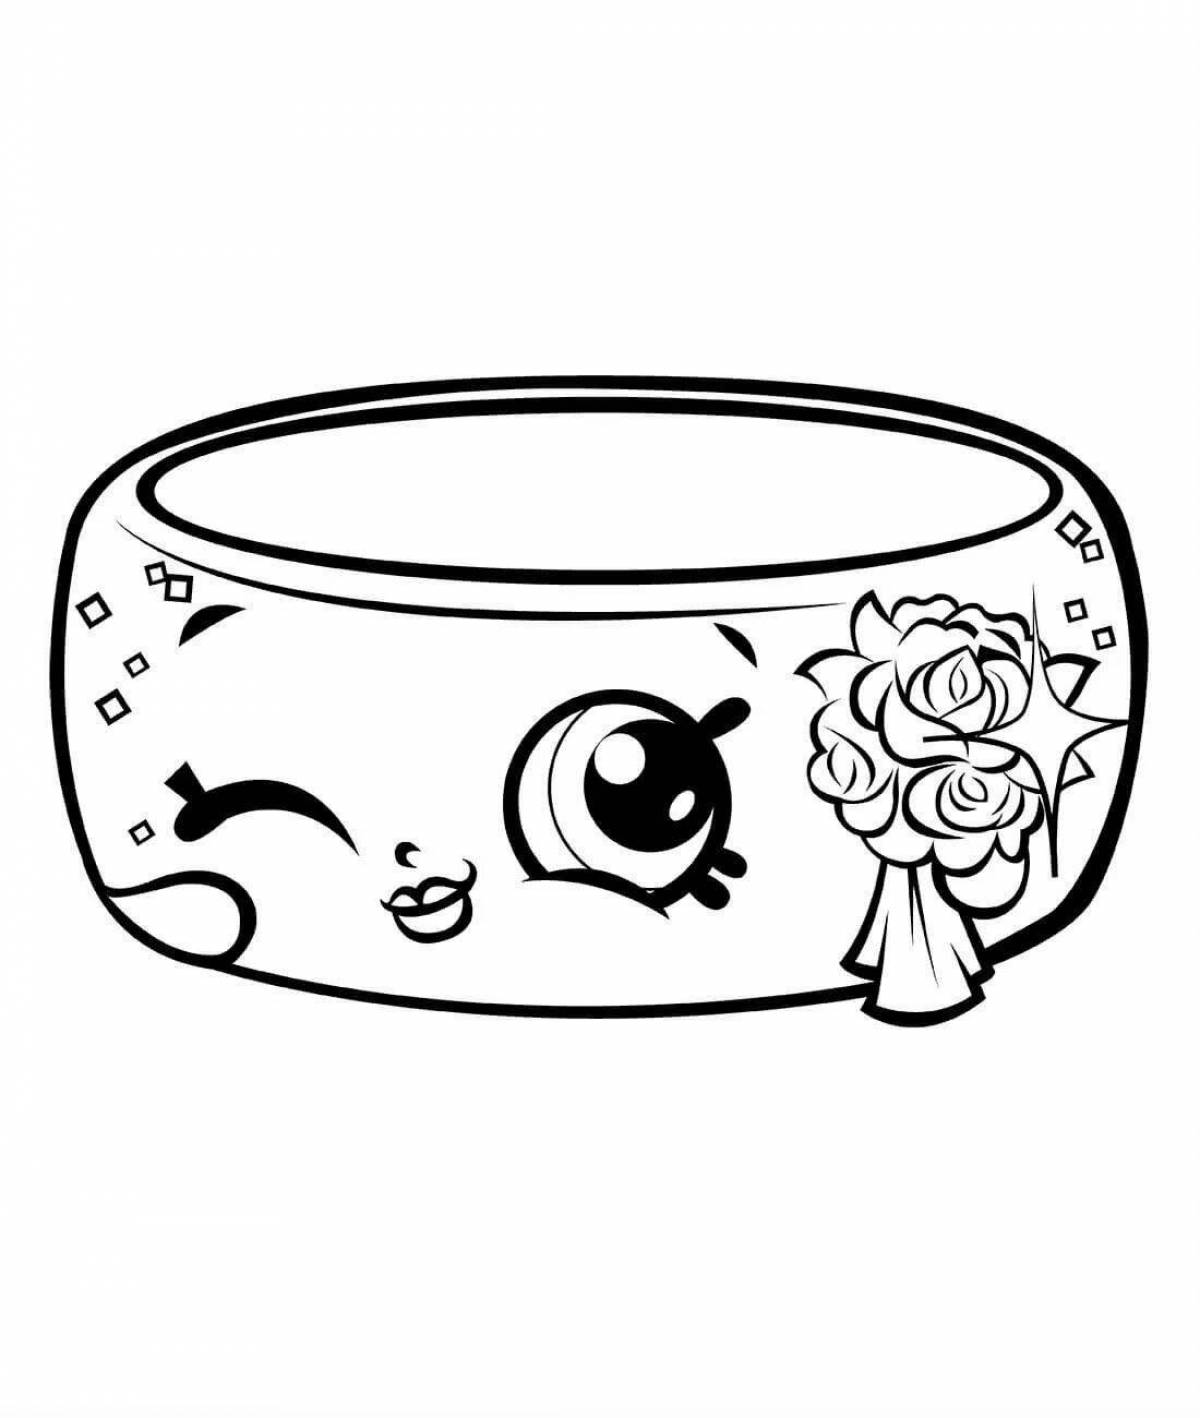 Coloring book happy bowl for kids